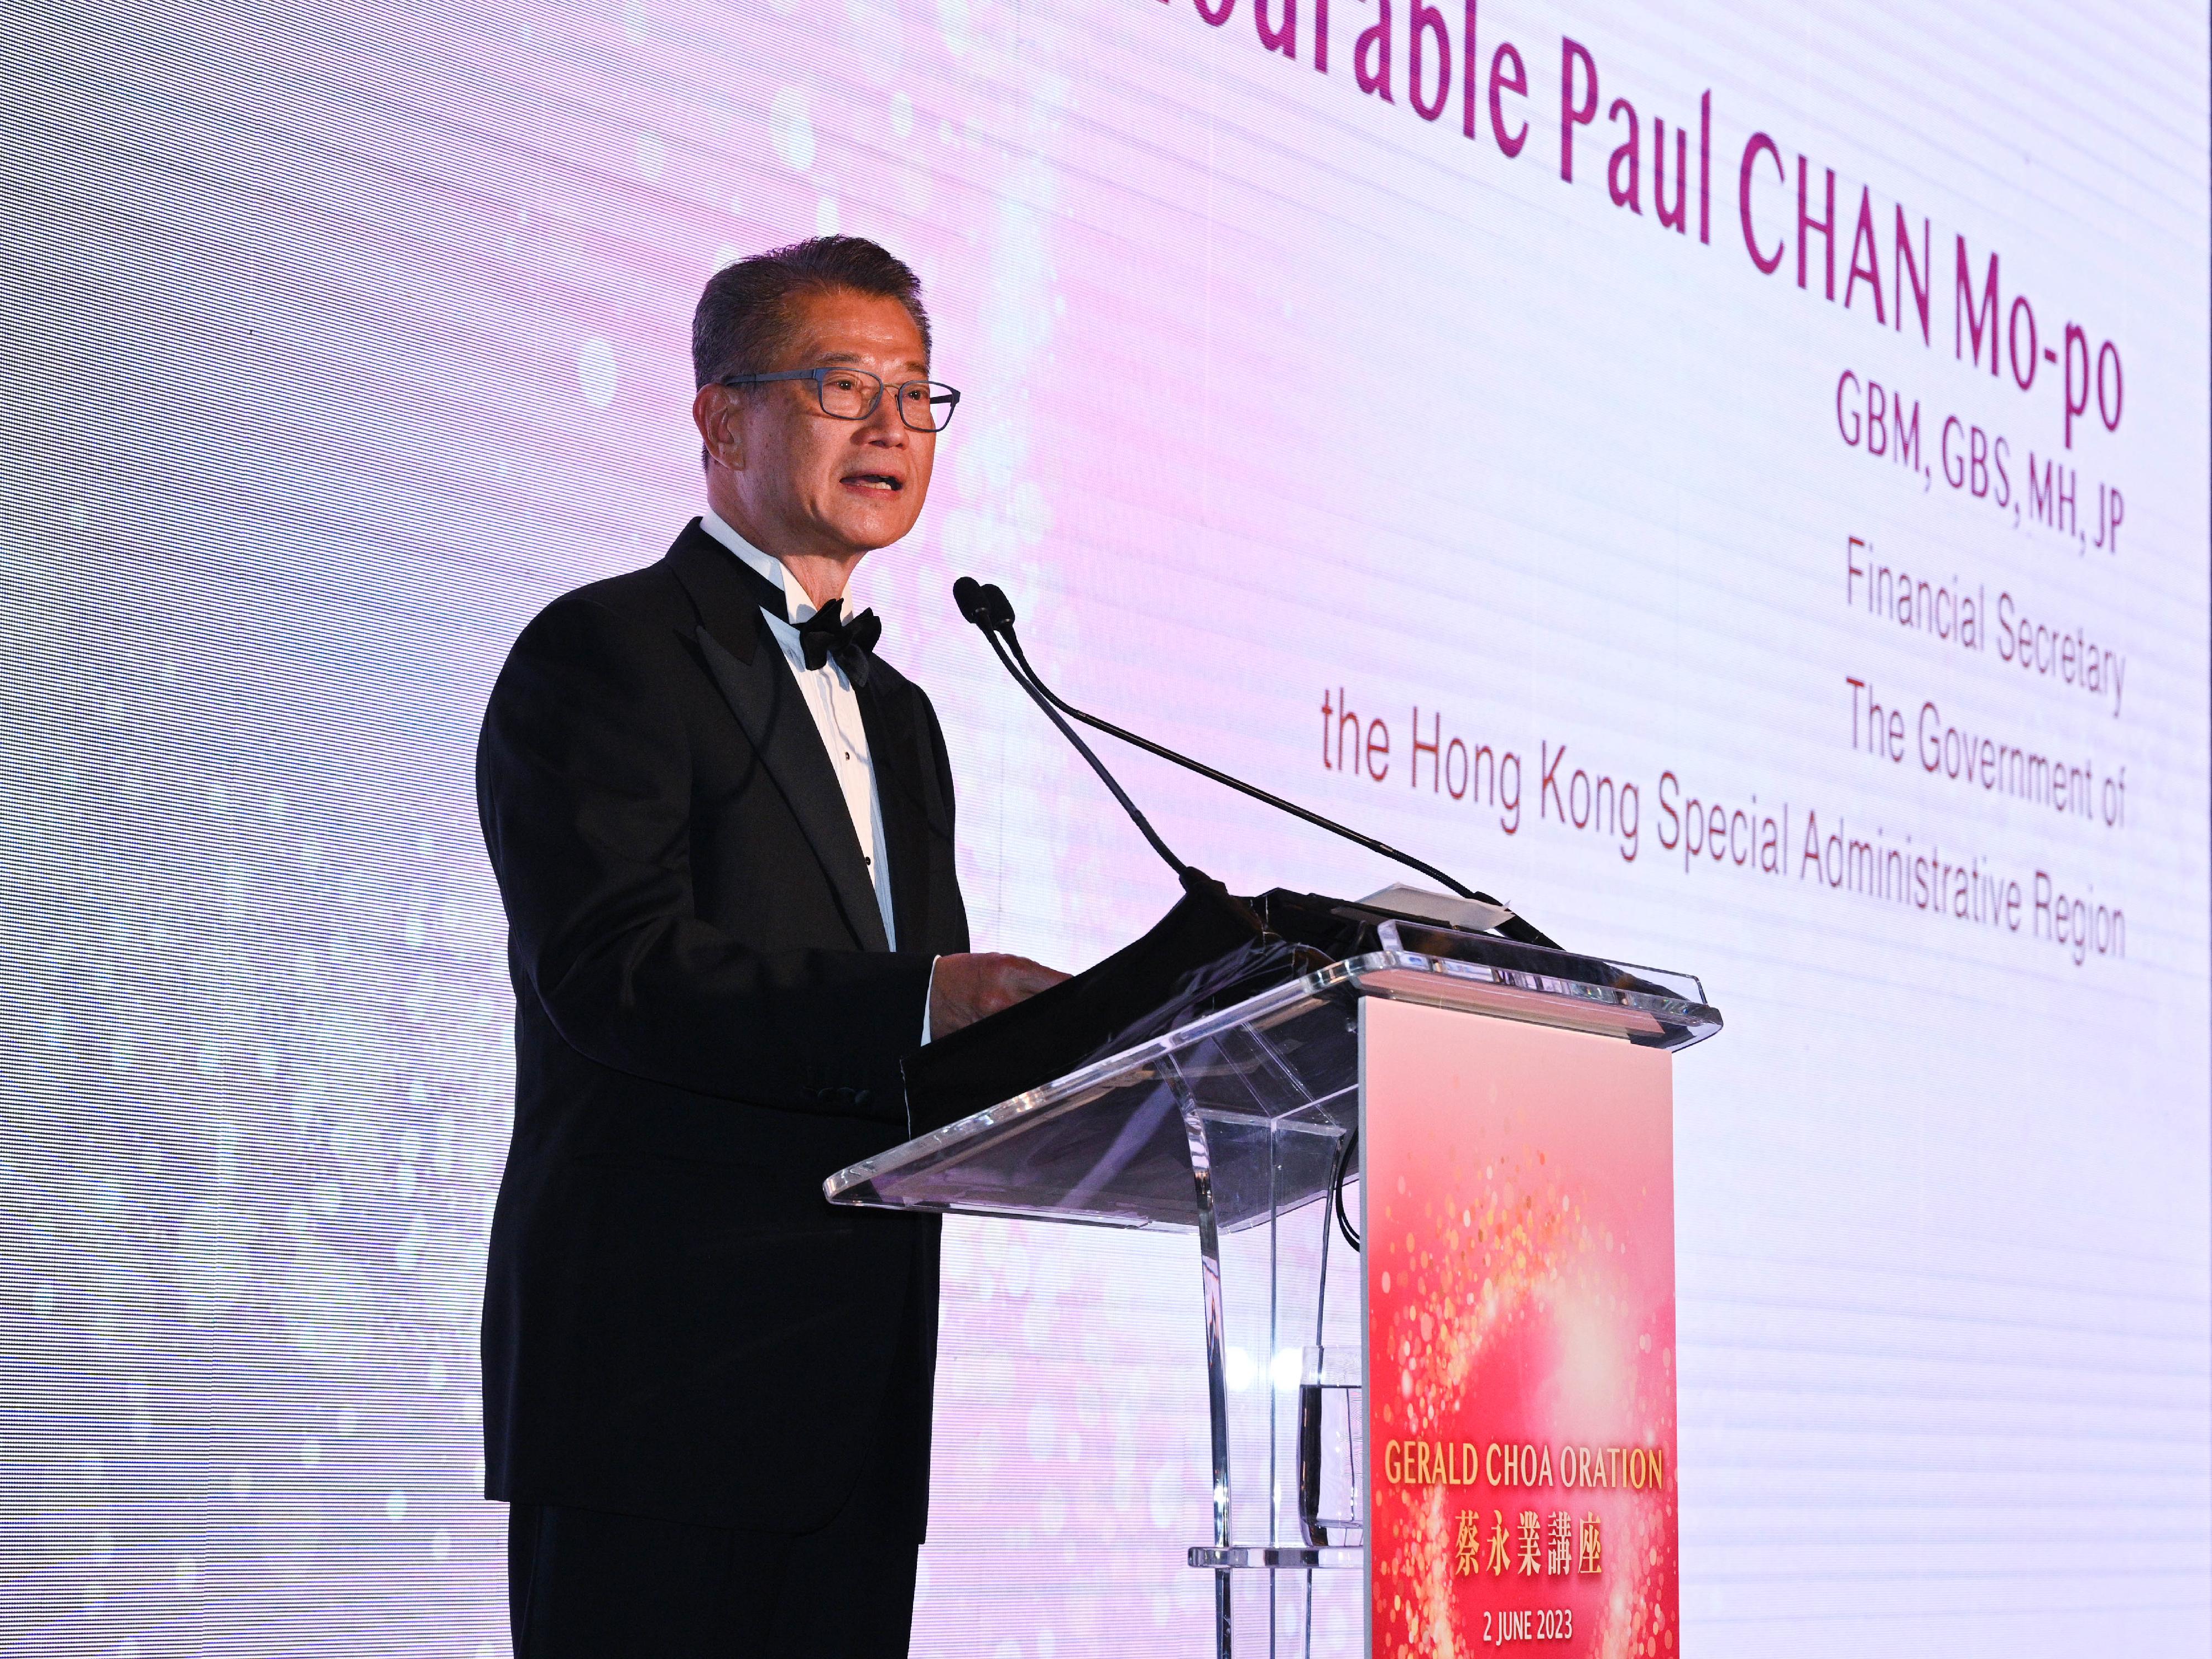 The Financial Secretary, Mr Paul Chan, delivers opening remarks at the Gerald Choa Oration 2023 today (June 2) organised by the Faculty of Medicine of the Chinese University of Hong Kong.